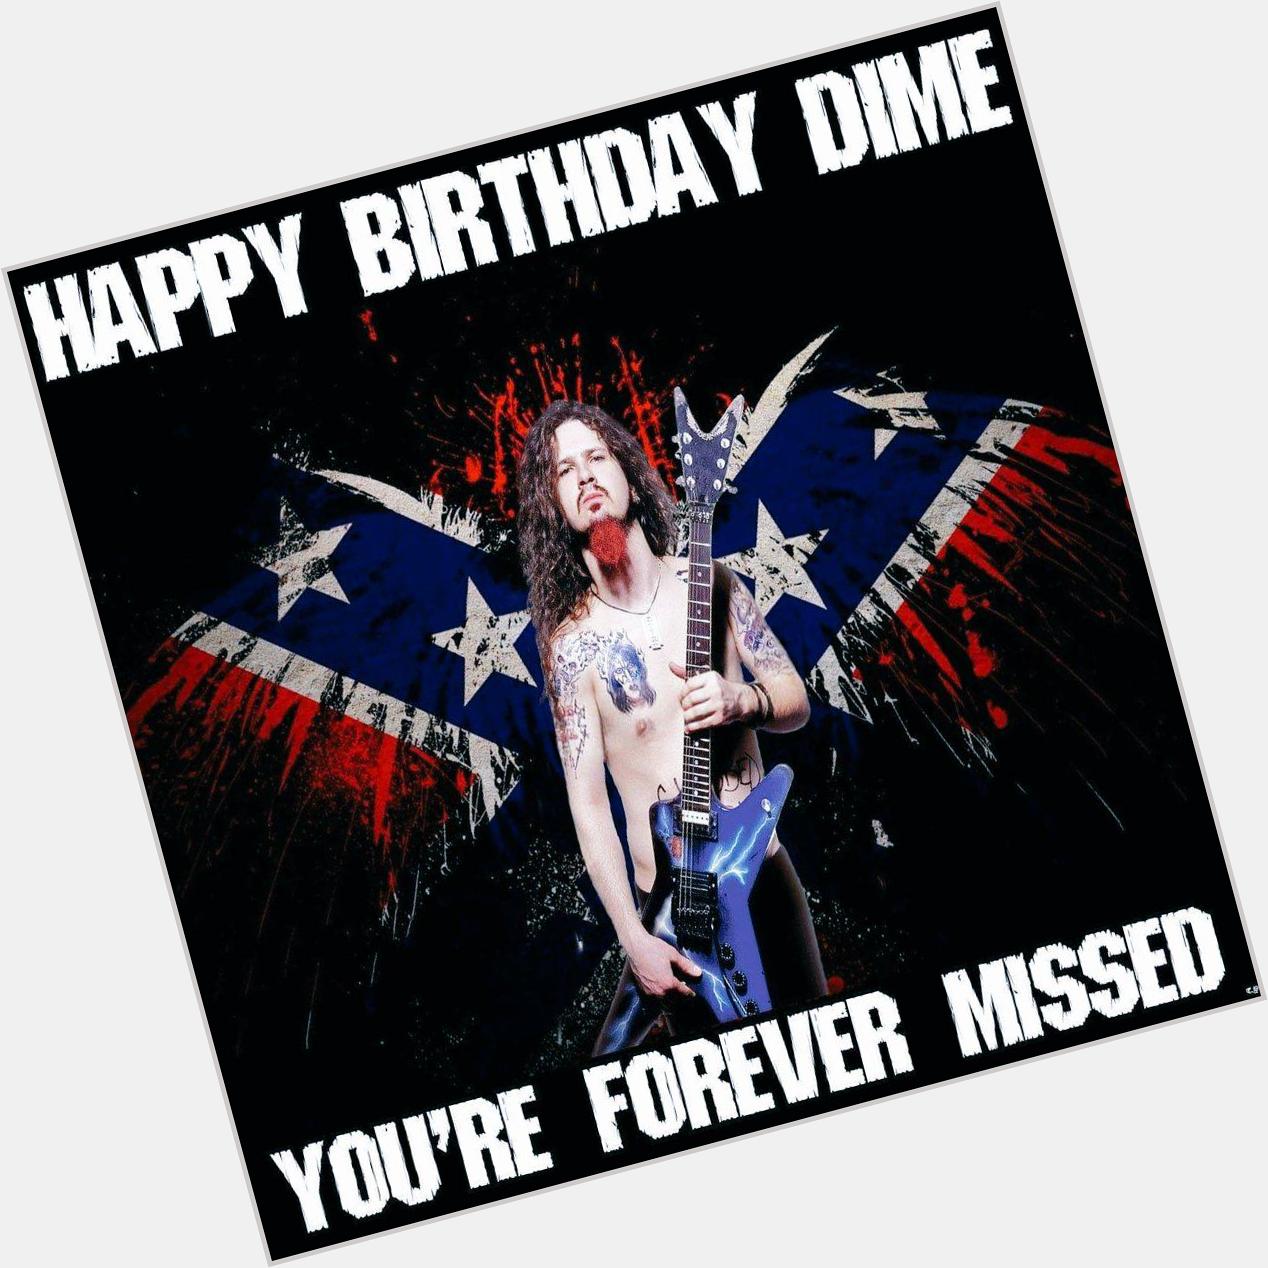 Happy birthday to the greatest to ever shred a guitar. RIP Dimebag Darrell 